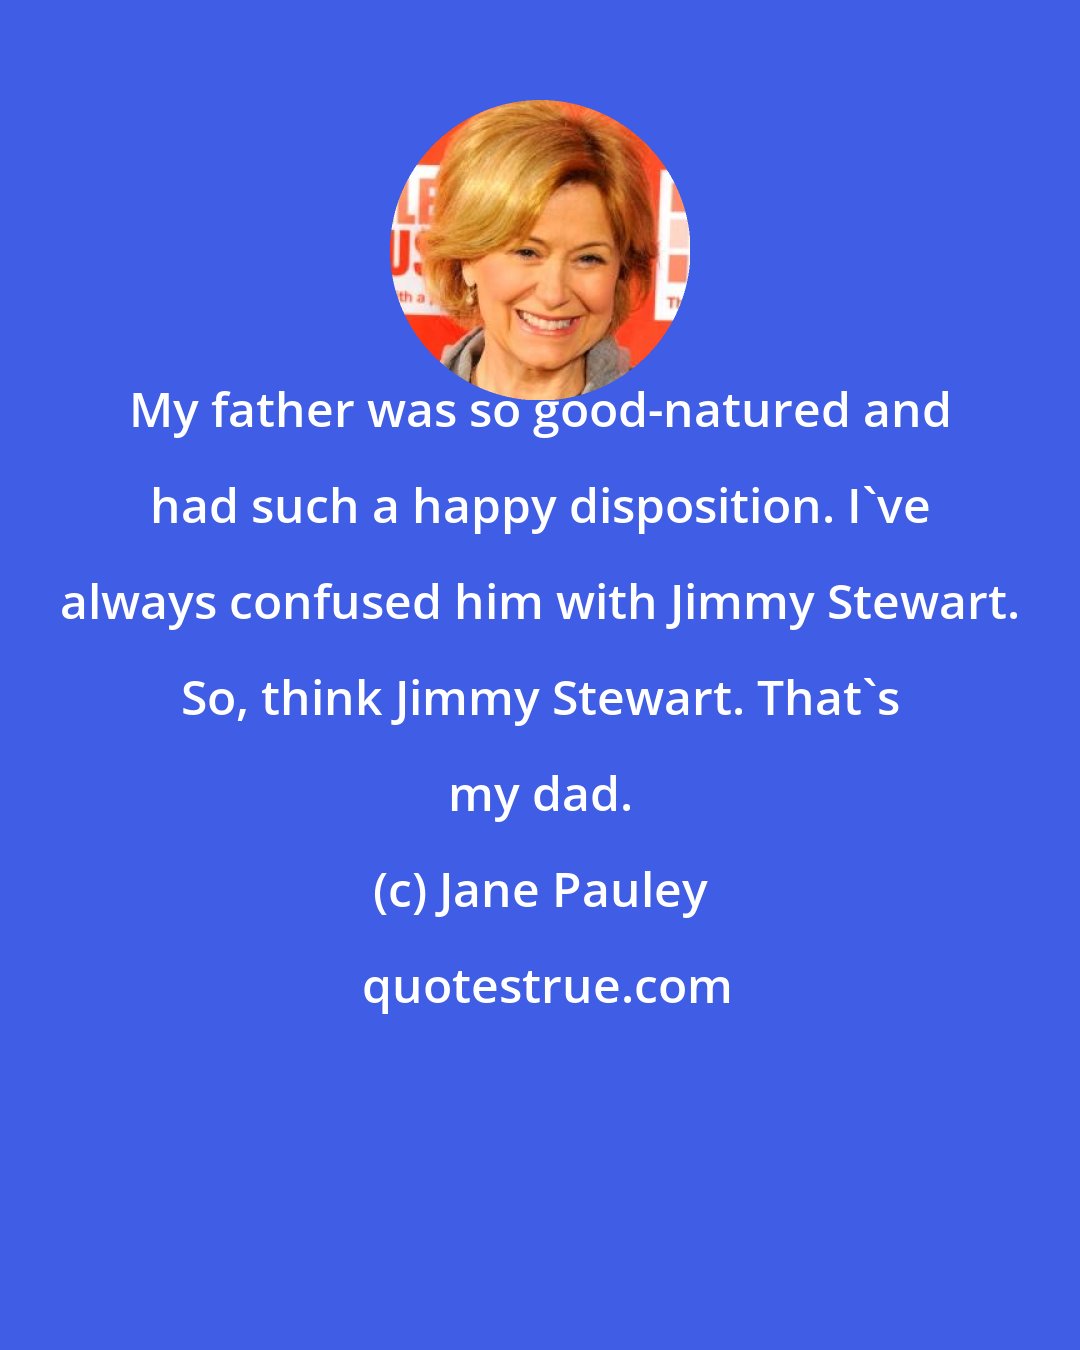 Jane Pauley: My father was so good-natured and had such a happy disposition. I've always confused him with Jimmy Stewart. So, think Jimmy Stewart. That's my dad.